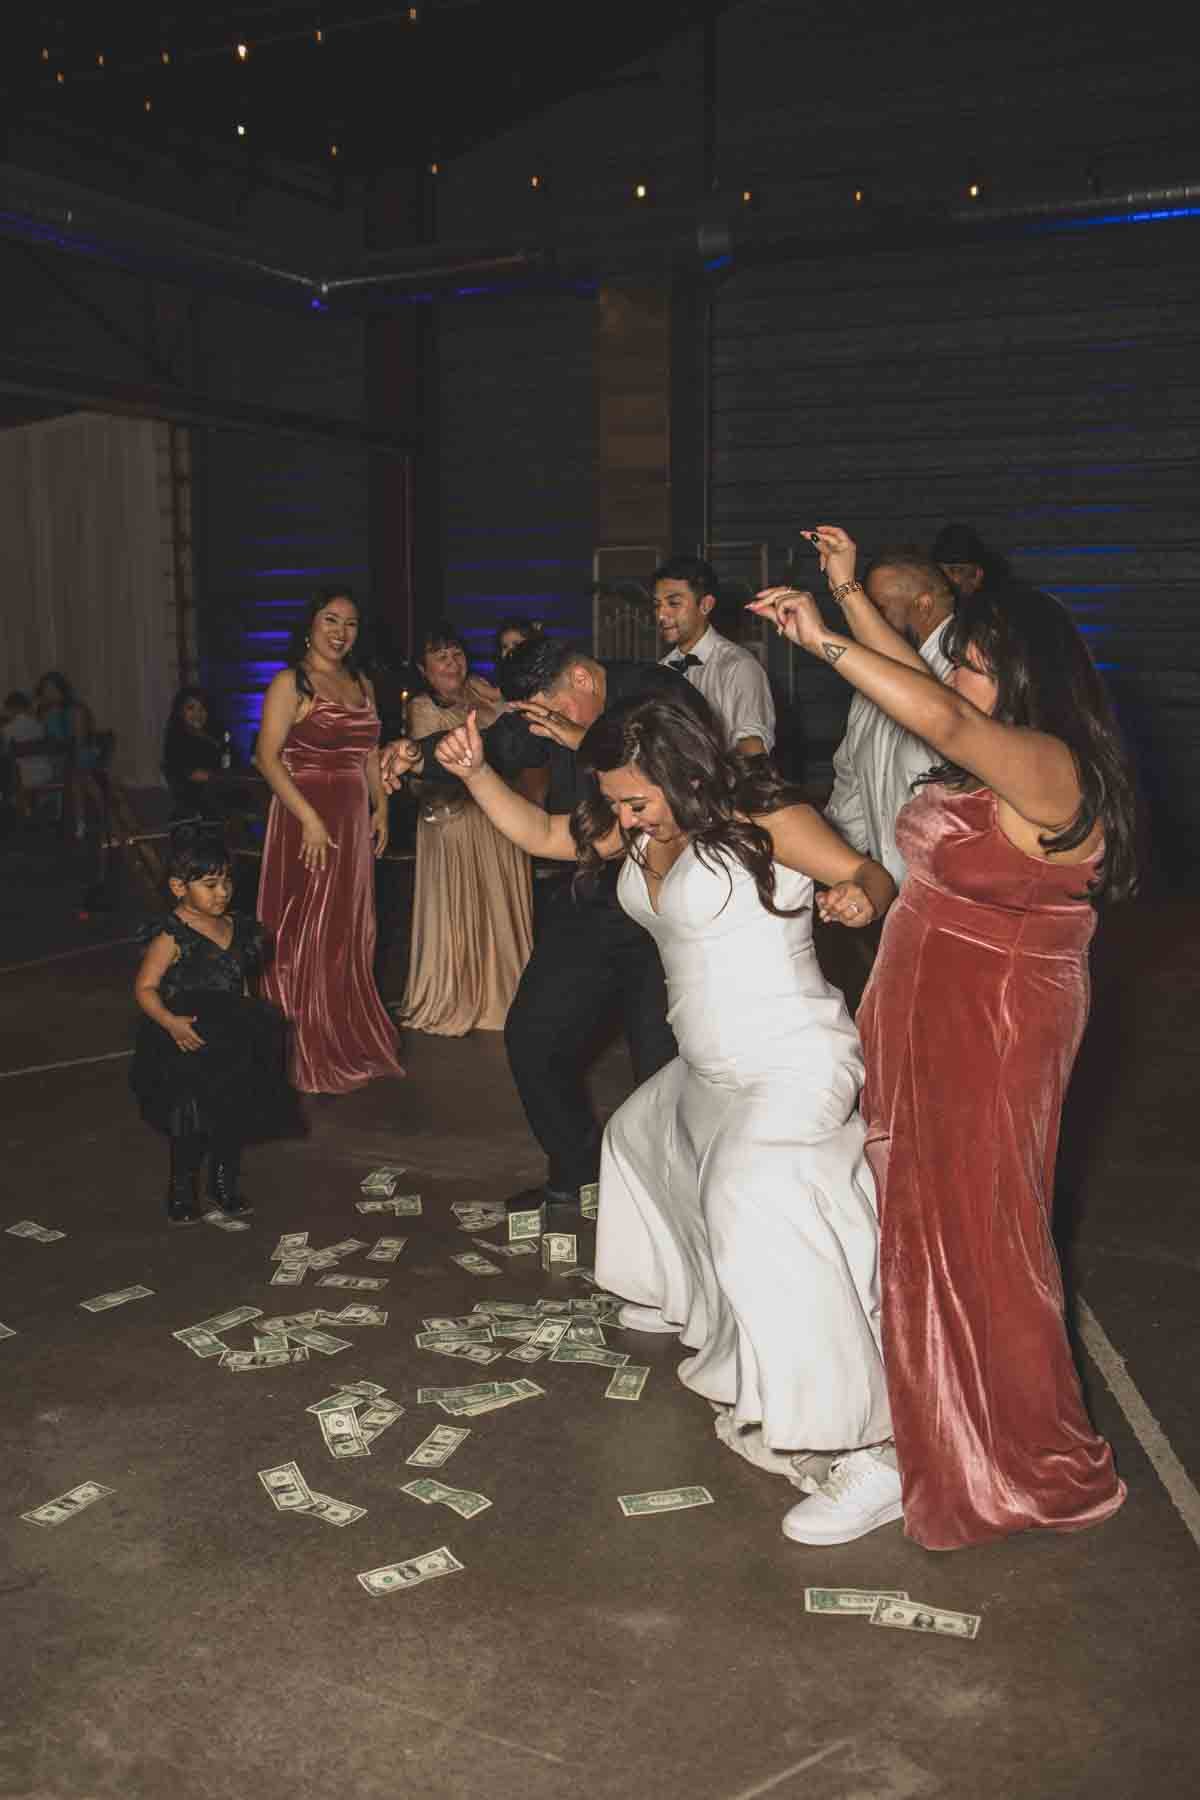  Bride and her guests dance at their Wedding Reception Celebration at Mexican Cowboy / Vaquero Farm Wedding at the Big Red Barn wedding at Schnepf Farms in Queen Creek, Arizona by Arizona based Photographer, Jennifer Lind Schutsky. 